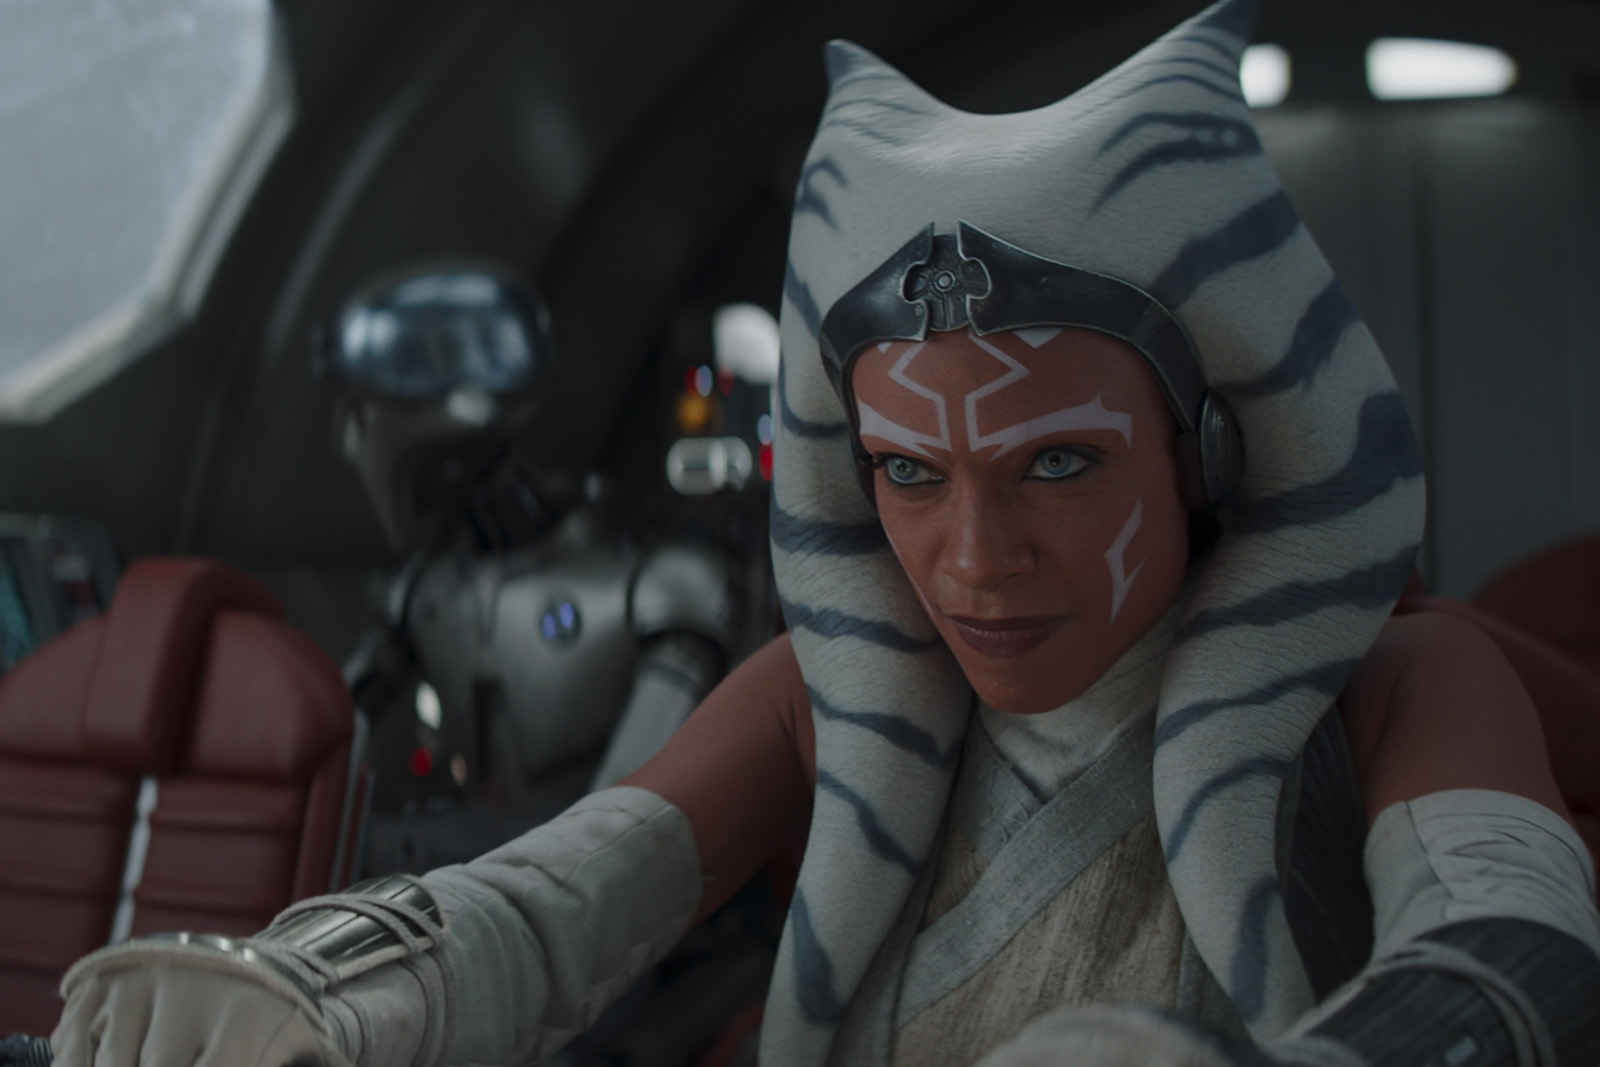 Ahsoka, now an integral member of the Rebel Alliance, races to stop Grand Admiral Thrawn.